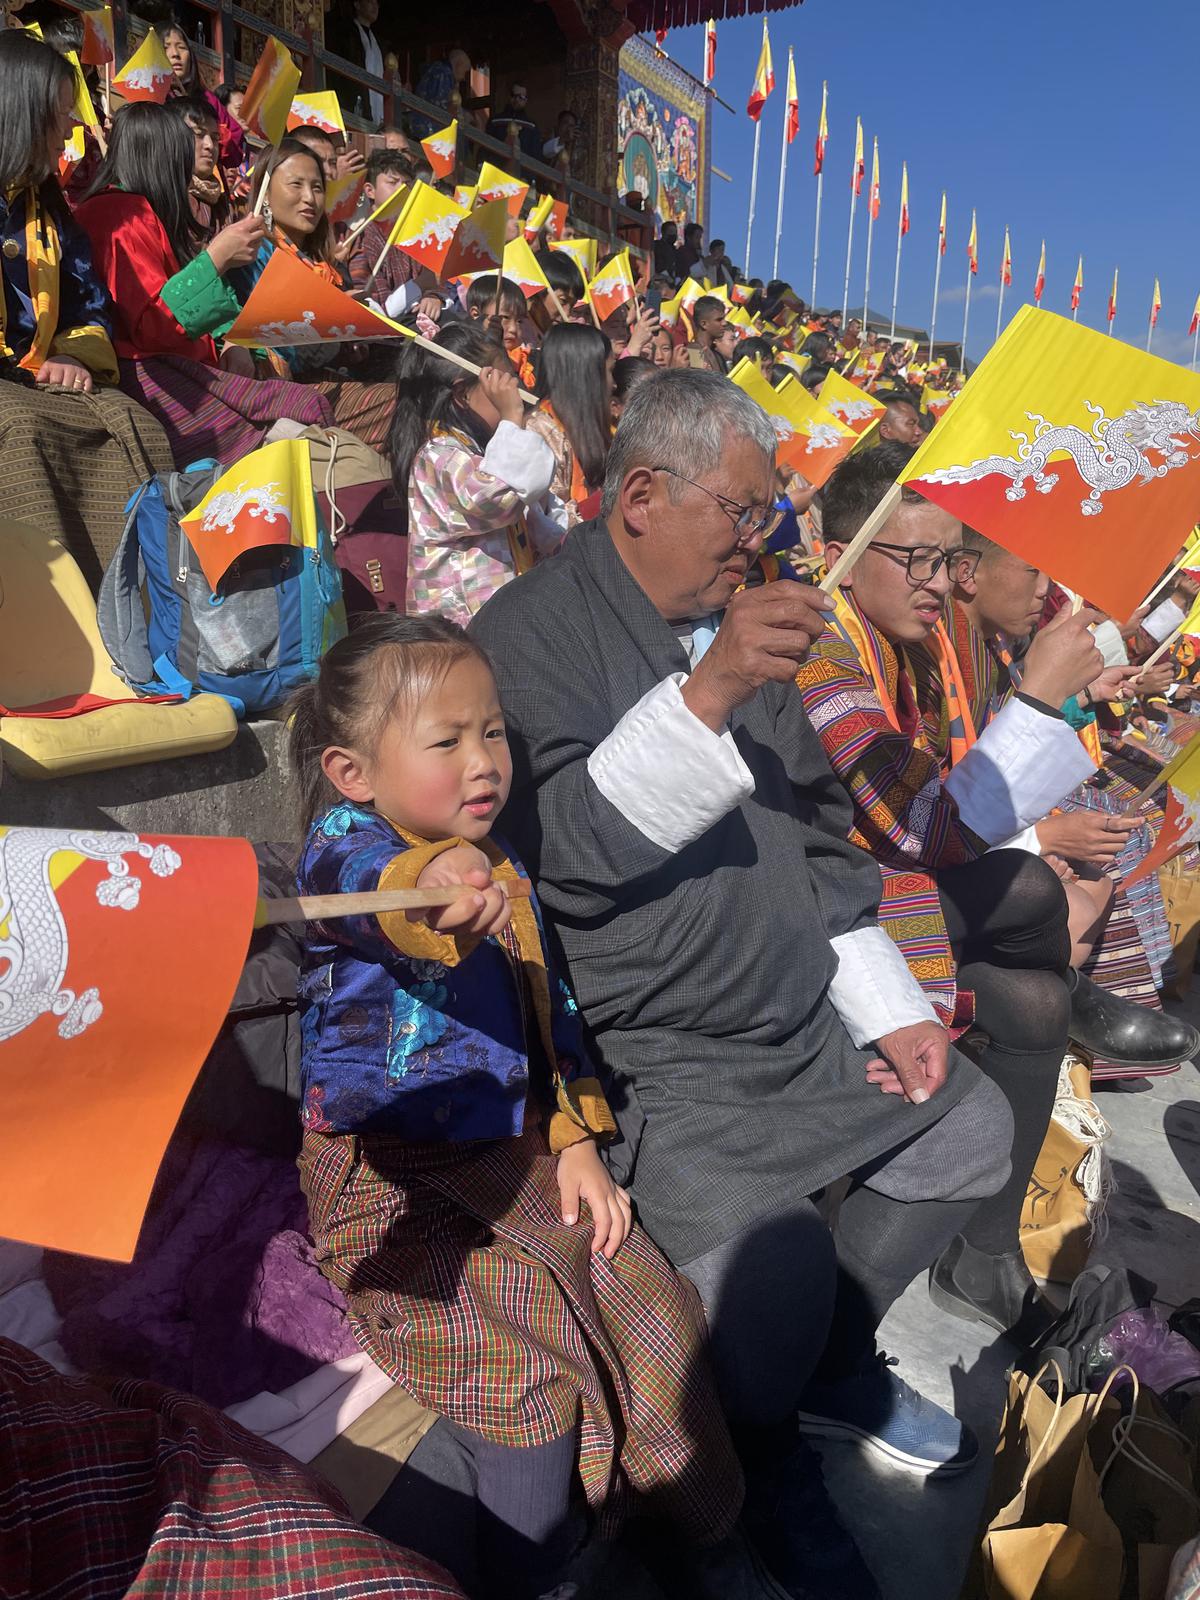  Bhutan’s 116th National Day celebrations in Thimphu